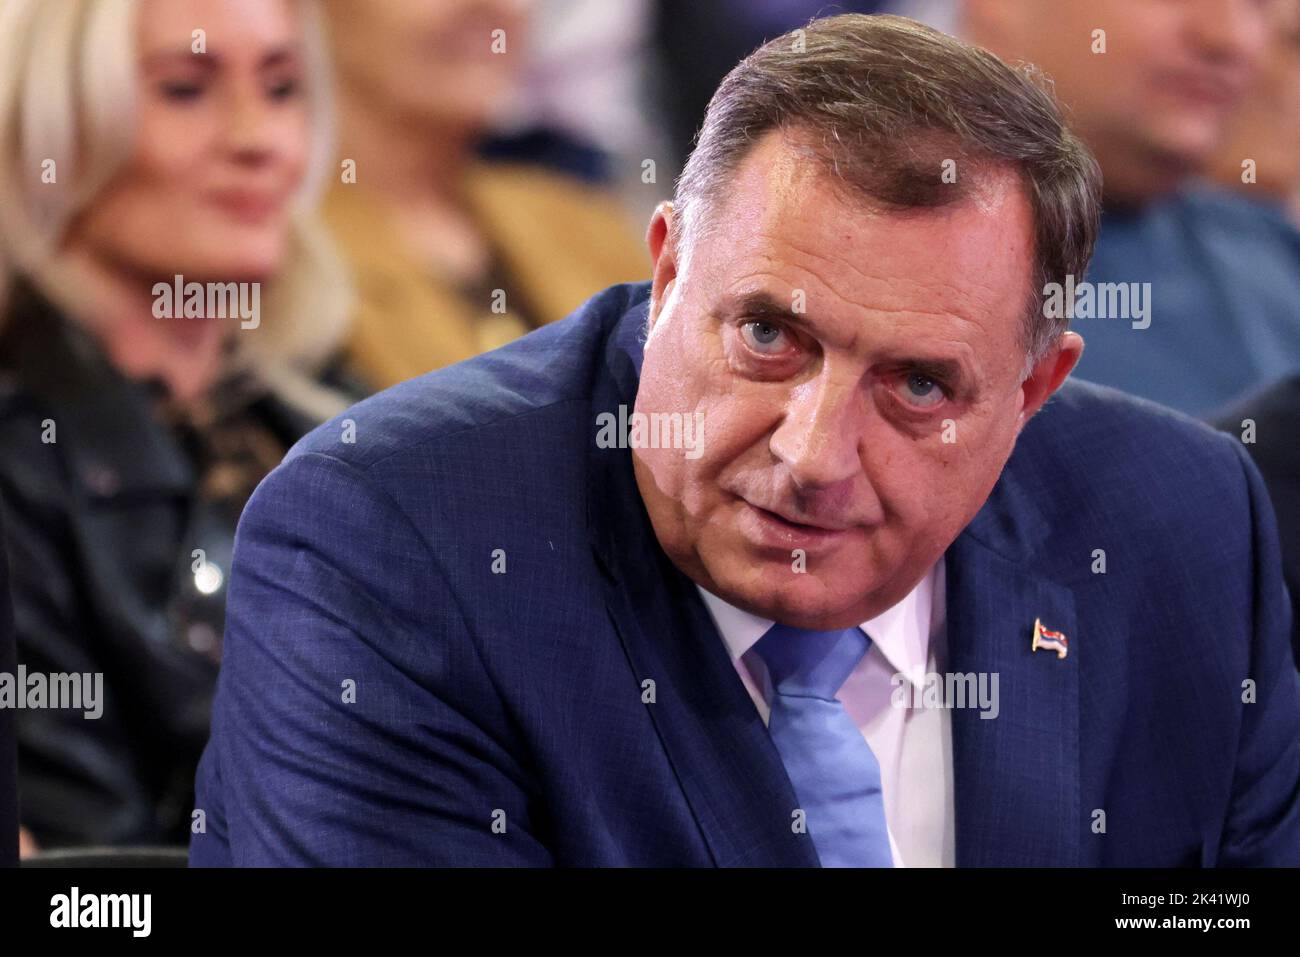 Serb candidate for President of Republika Srpska Milorad Dodik of the Alliance of Independent Social Democrats (SNSD) attends a pre-election rally in Gradiska, Bosnia and Herzegovina, September 28, 2022. REUTERS/Dado Ruvic Stock Photo